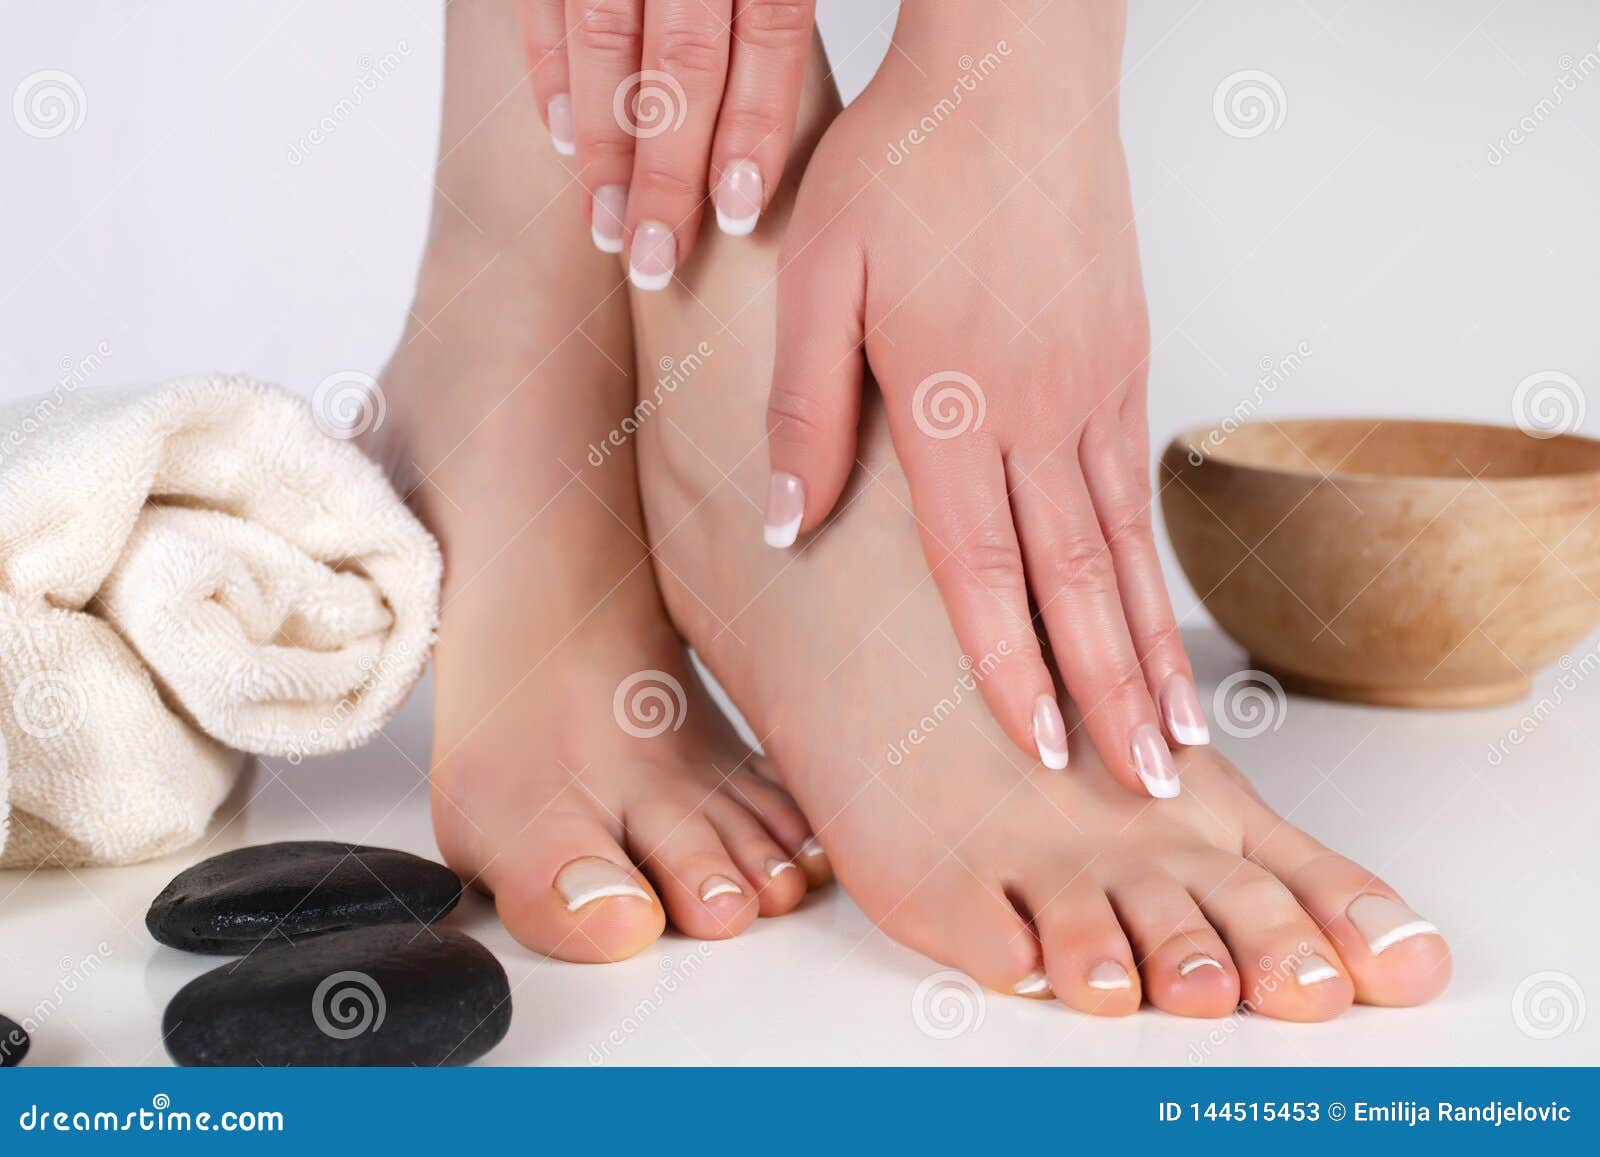 embrace beauty and femininity: french manicure and pedicure in a spa studio